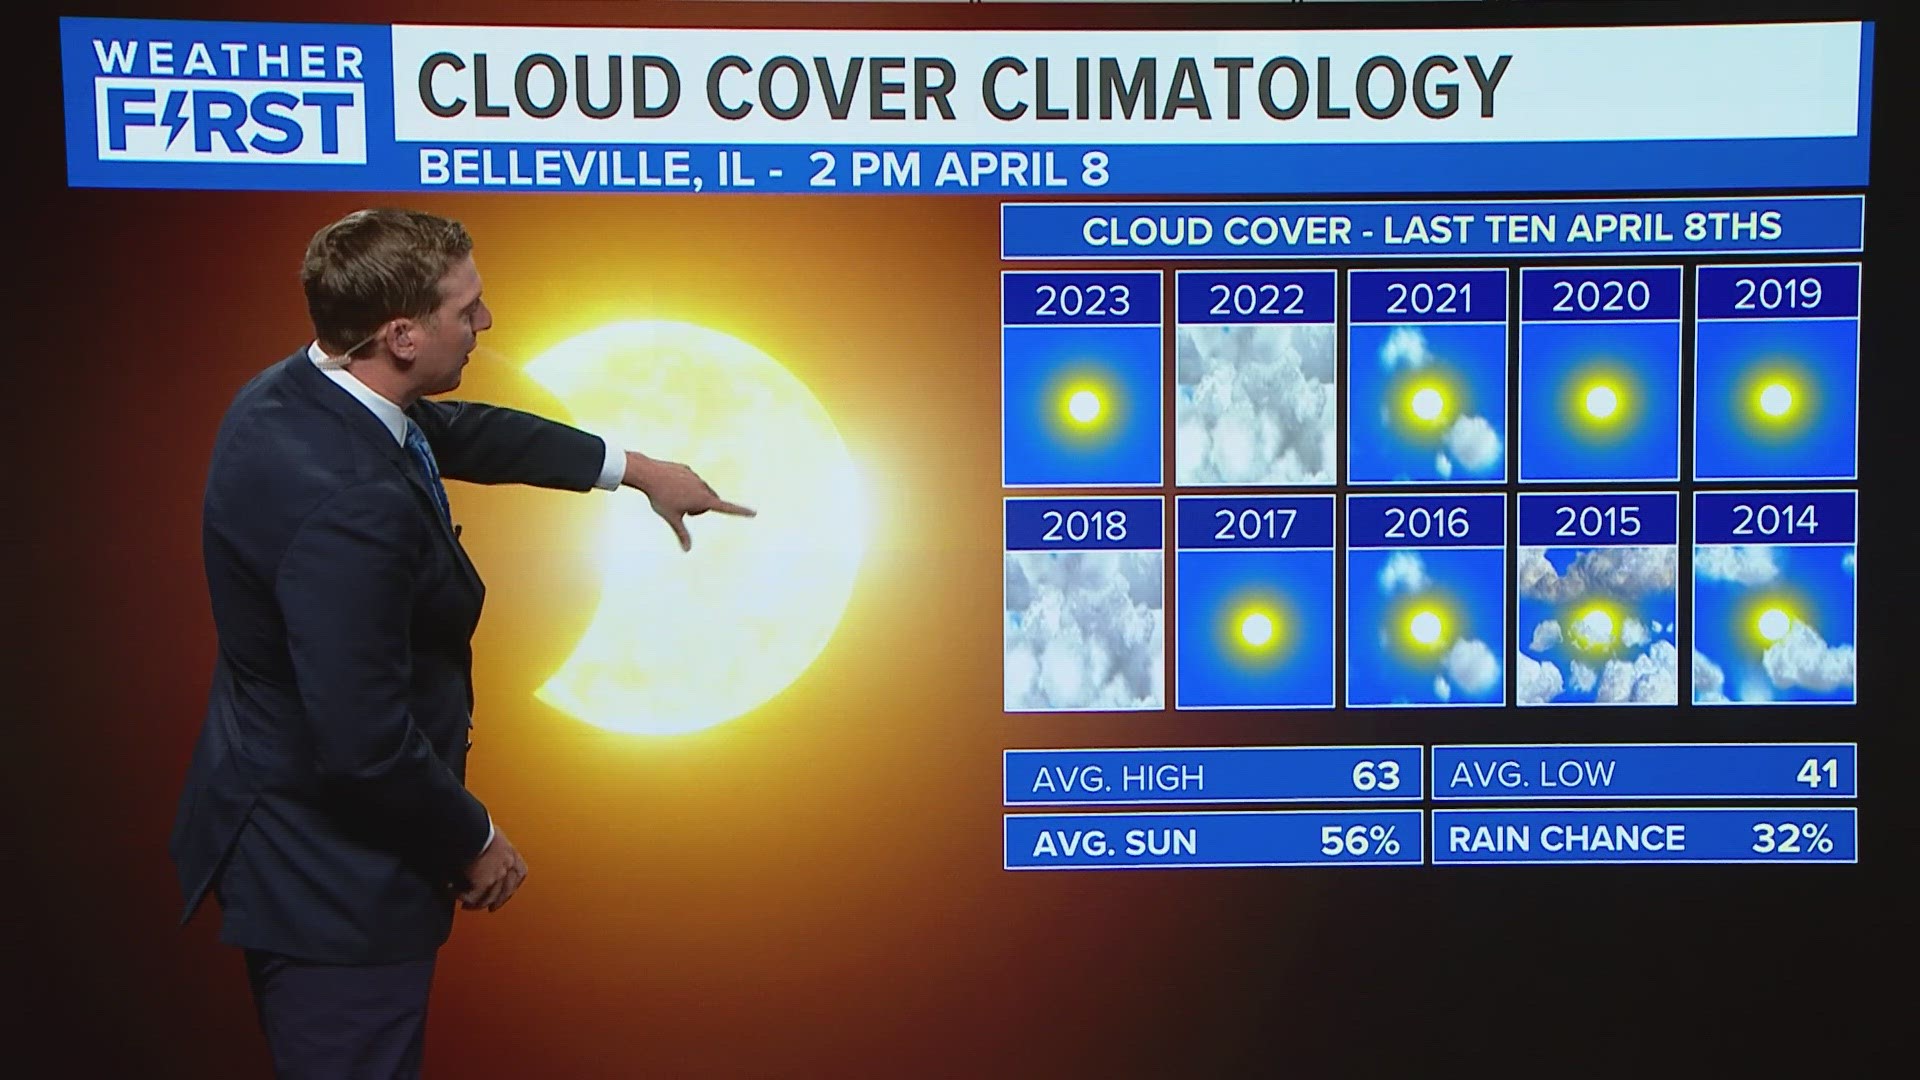 Cloud coverage is trending nicely for our area, but why does the type of cloud make a big difference?